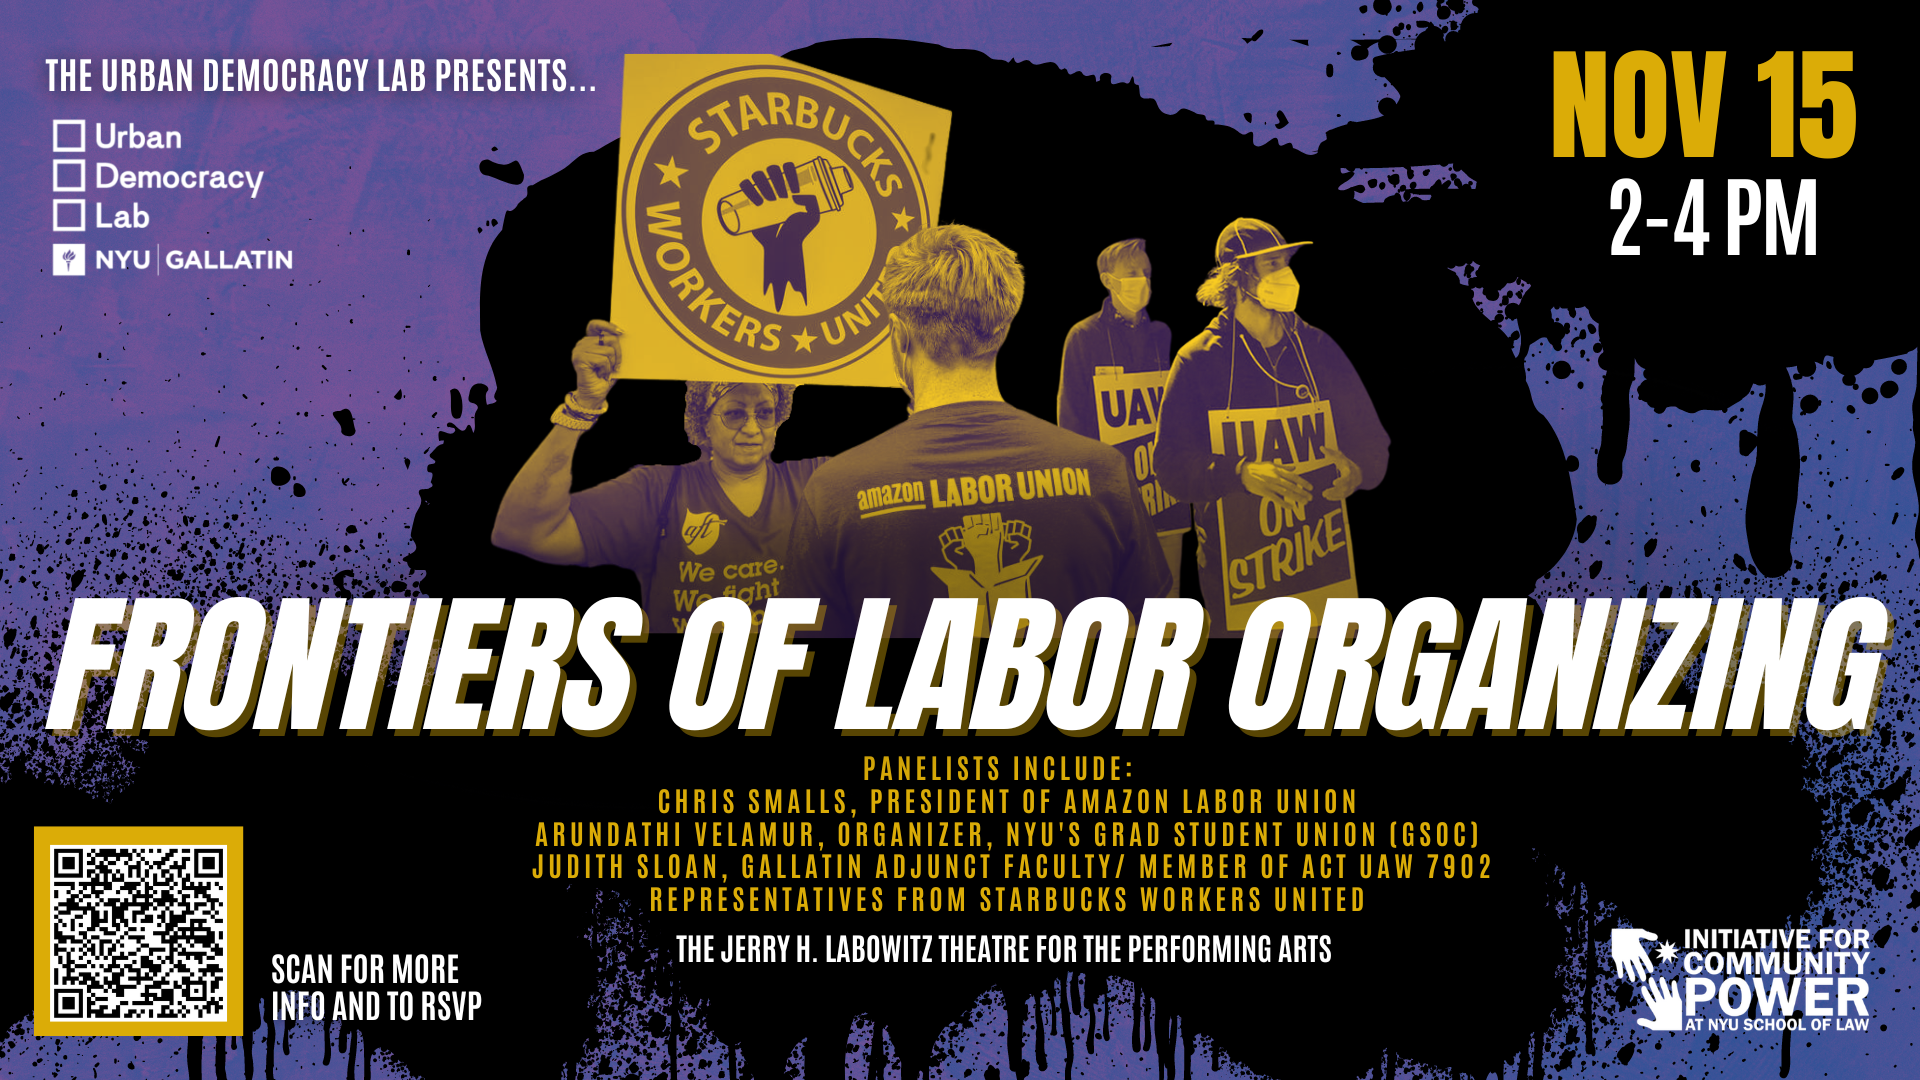 Frontiers of Labor Organizing